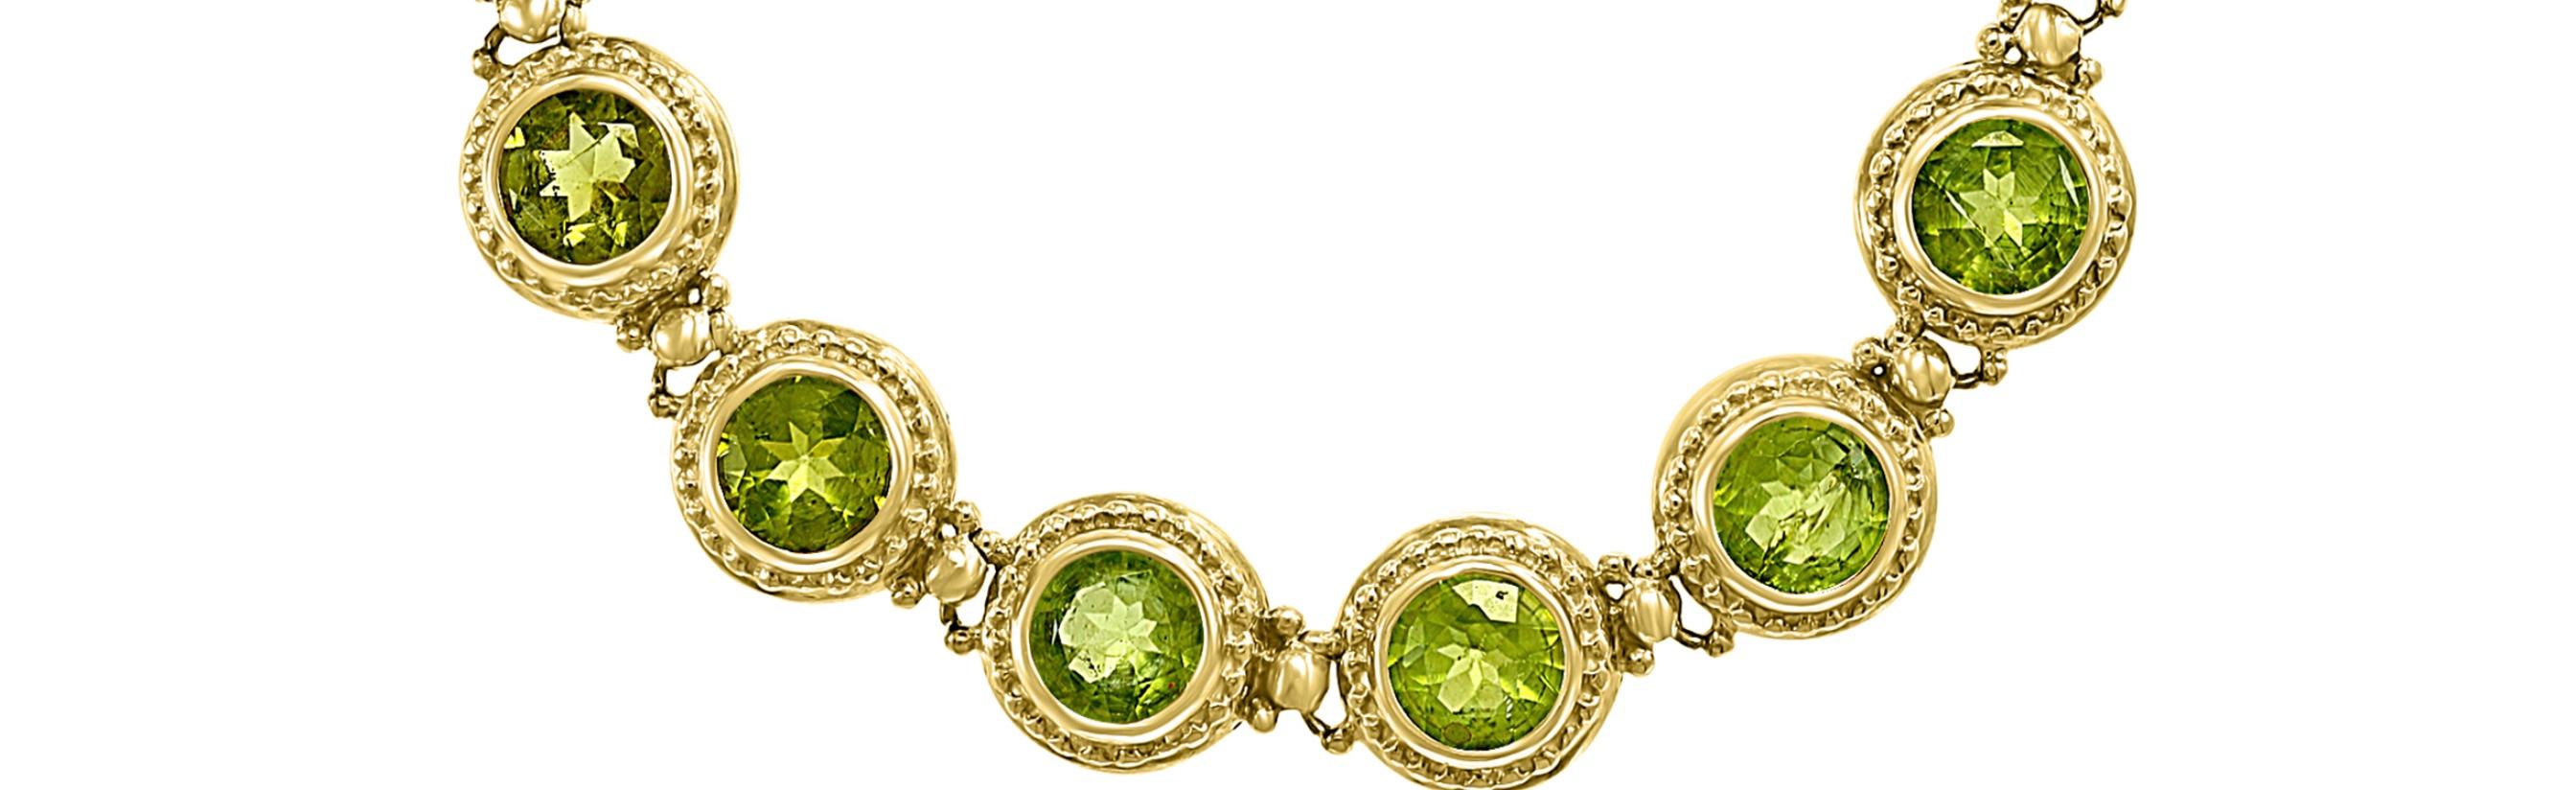  This exceptionally affordable Tennis  bracelet has  12 stones of Round shape Peridot
Beautiful colors , very Vibrant
Size of the stone is approximately 6 mm Round
Total weight of these Peridot is approximately 16 Ct
The bracelet is expertly crafted